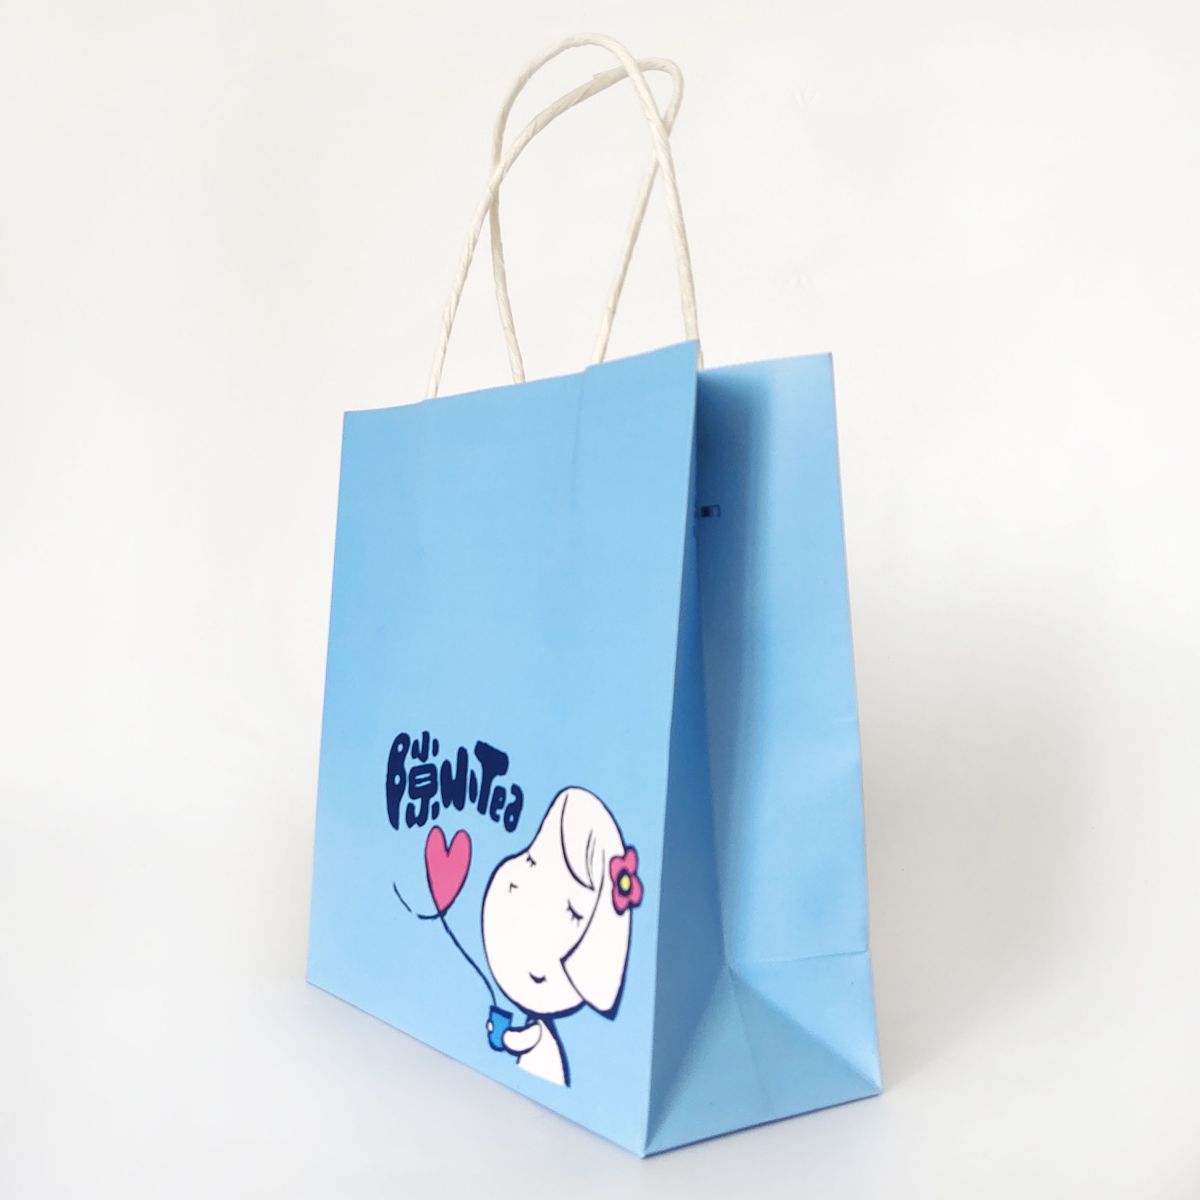 Recyclable High Quality Paper Bag